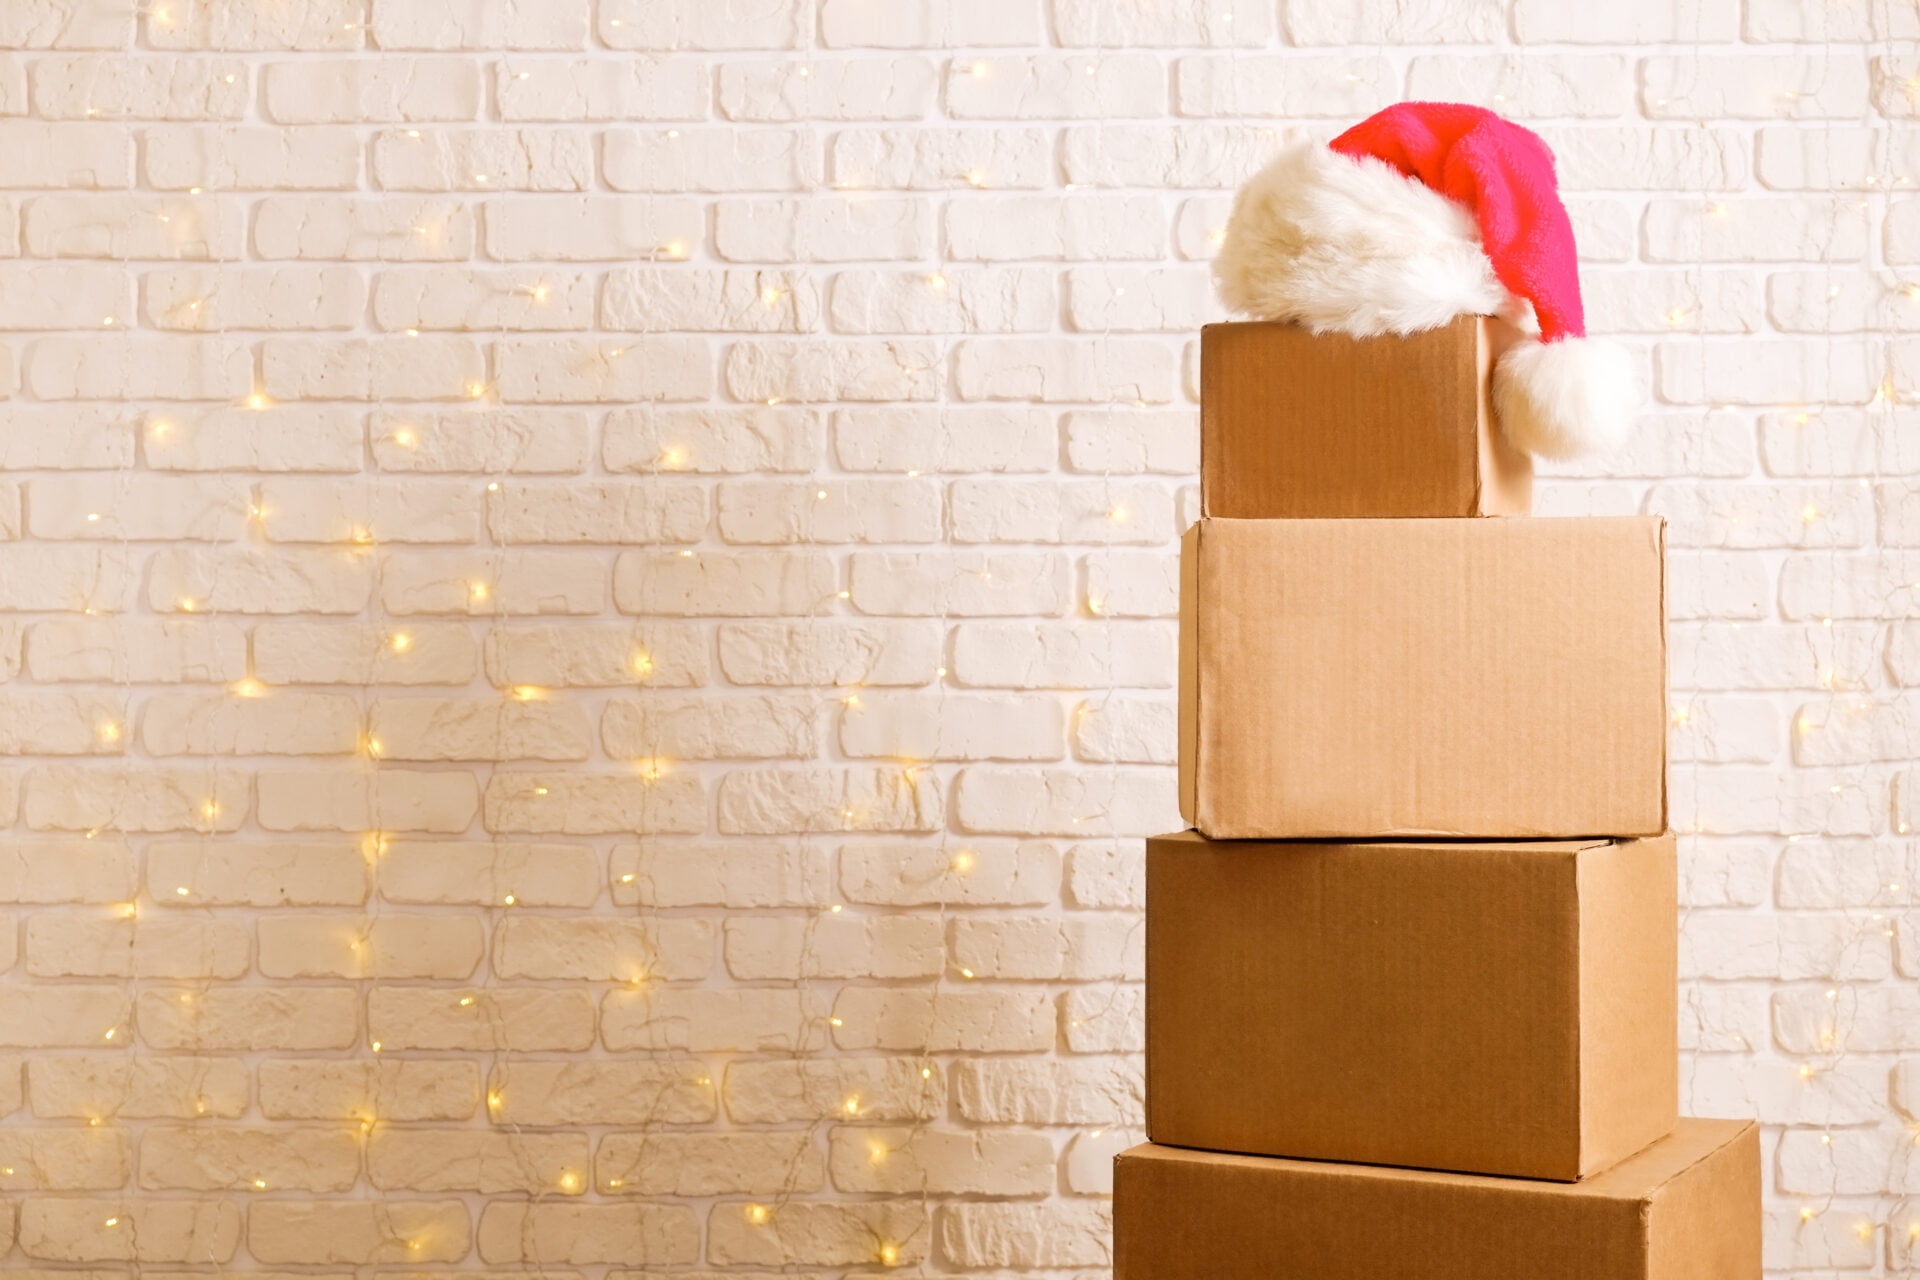 Non-toxic holiday gifts under $40 inside boxes